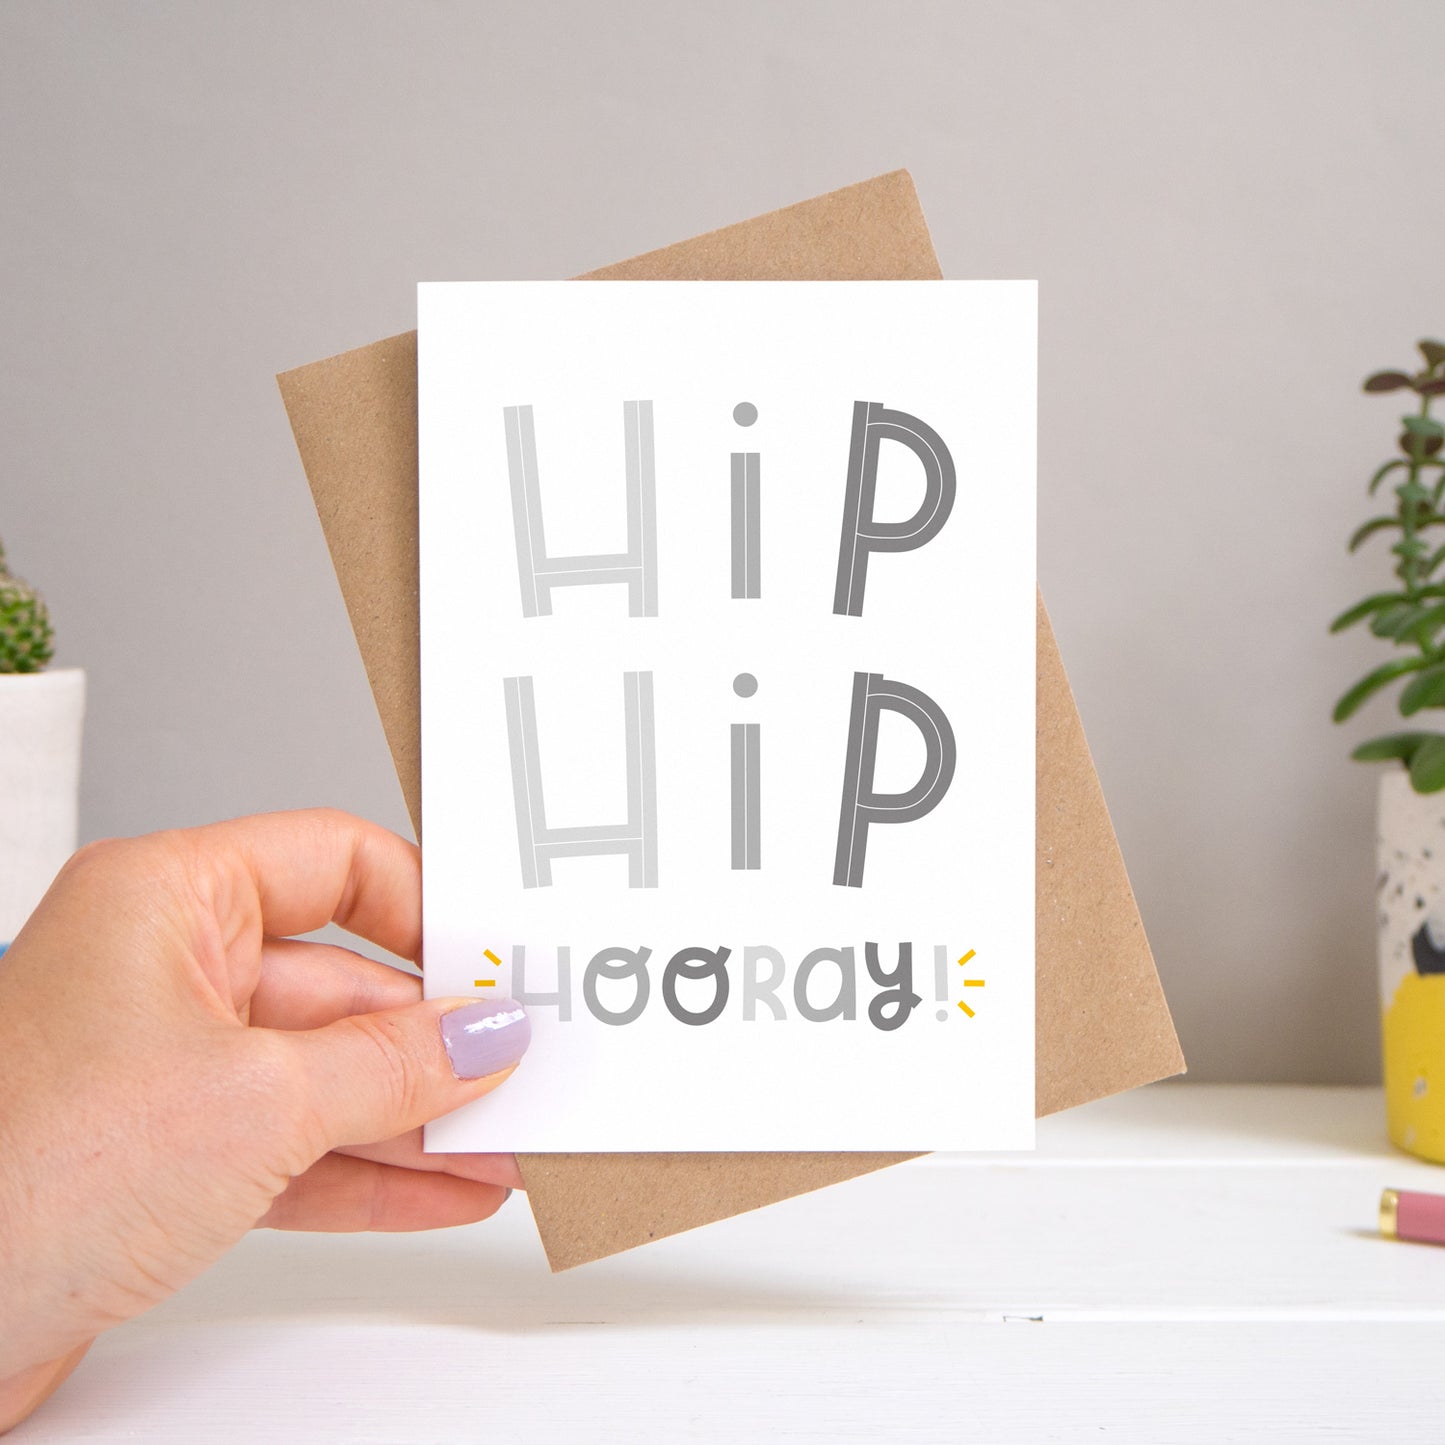 A ‘hip hip hooray!’ card held over a warm grey and white background with potted plants peeping the sides. Behind the card is a kraft brown envelope that comes with the card. The text on this version of the card is in varying tones of grey.